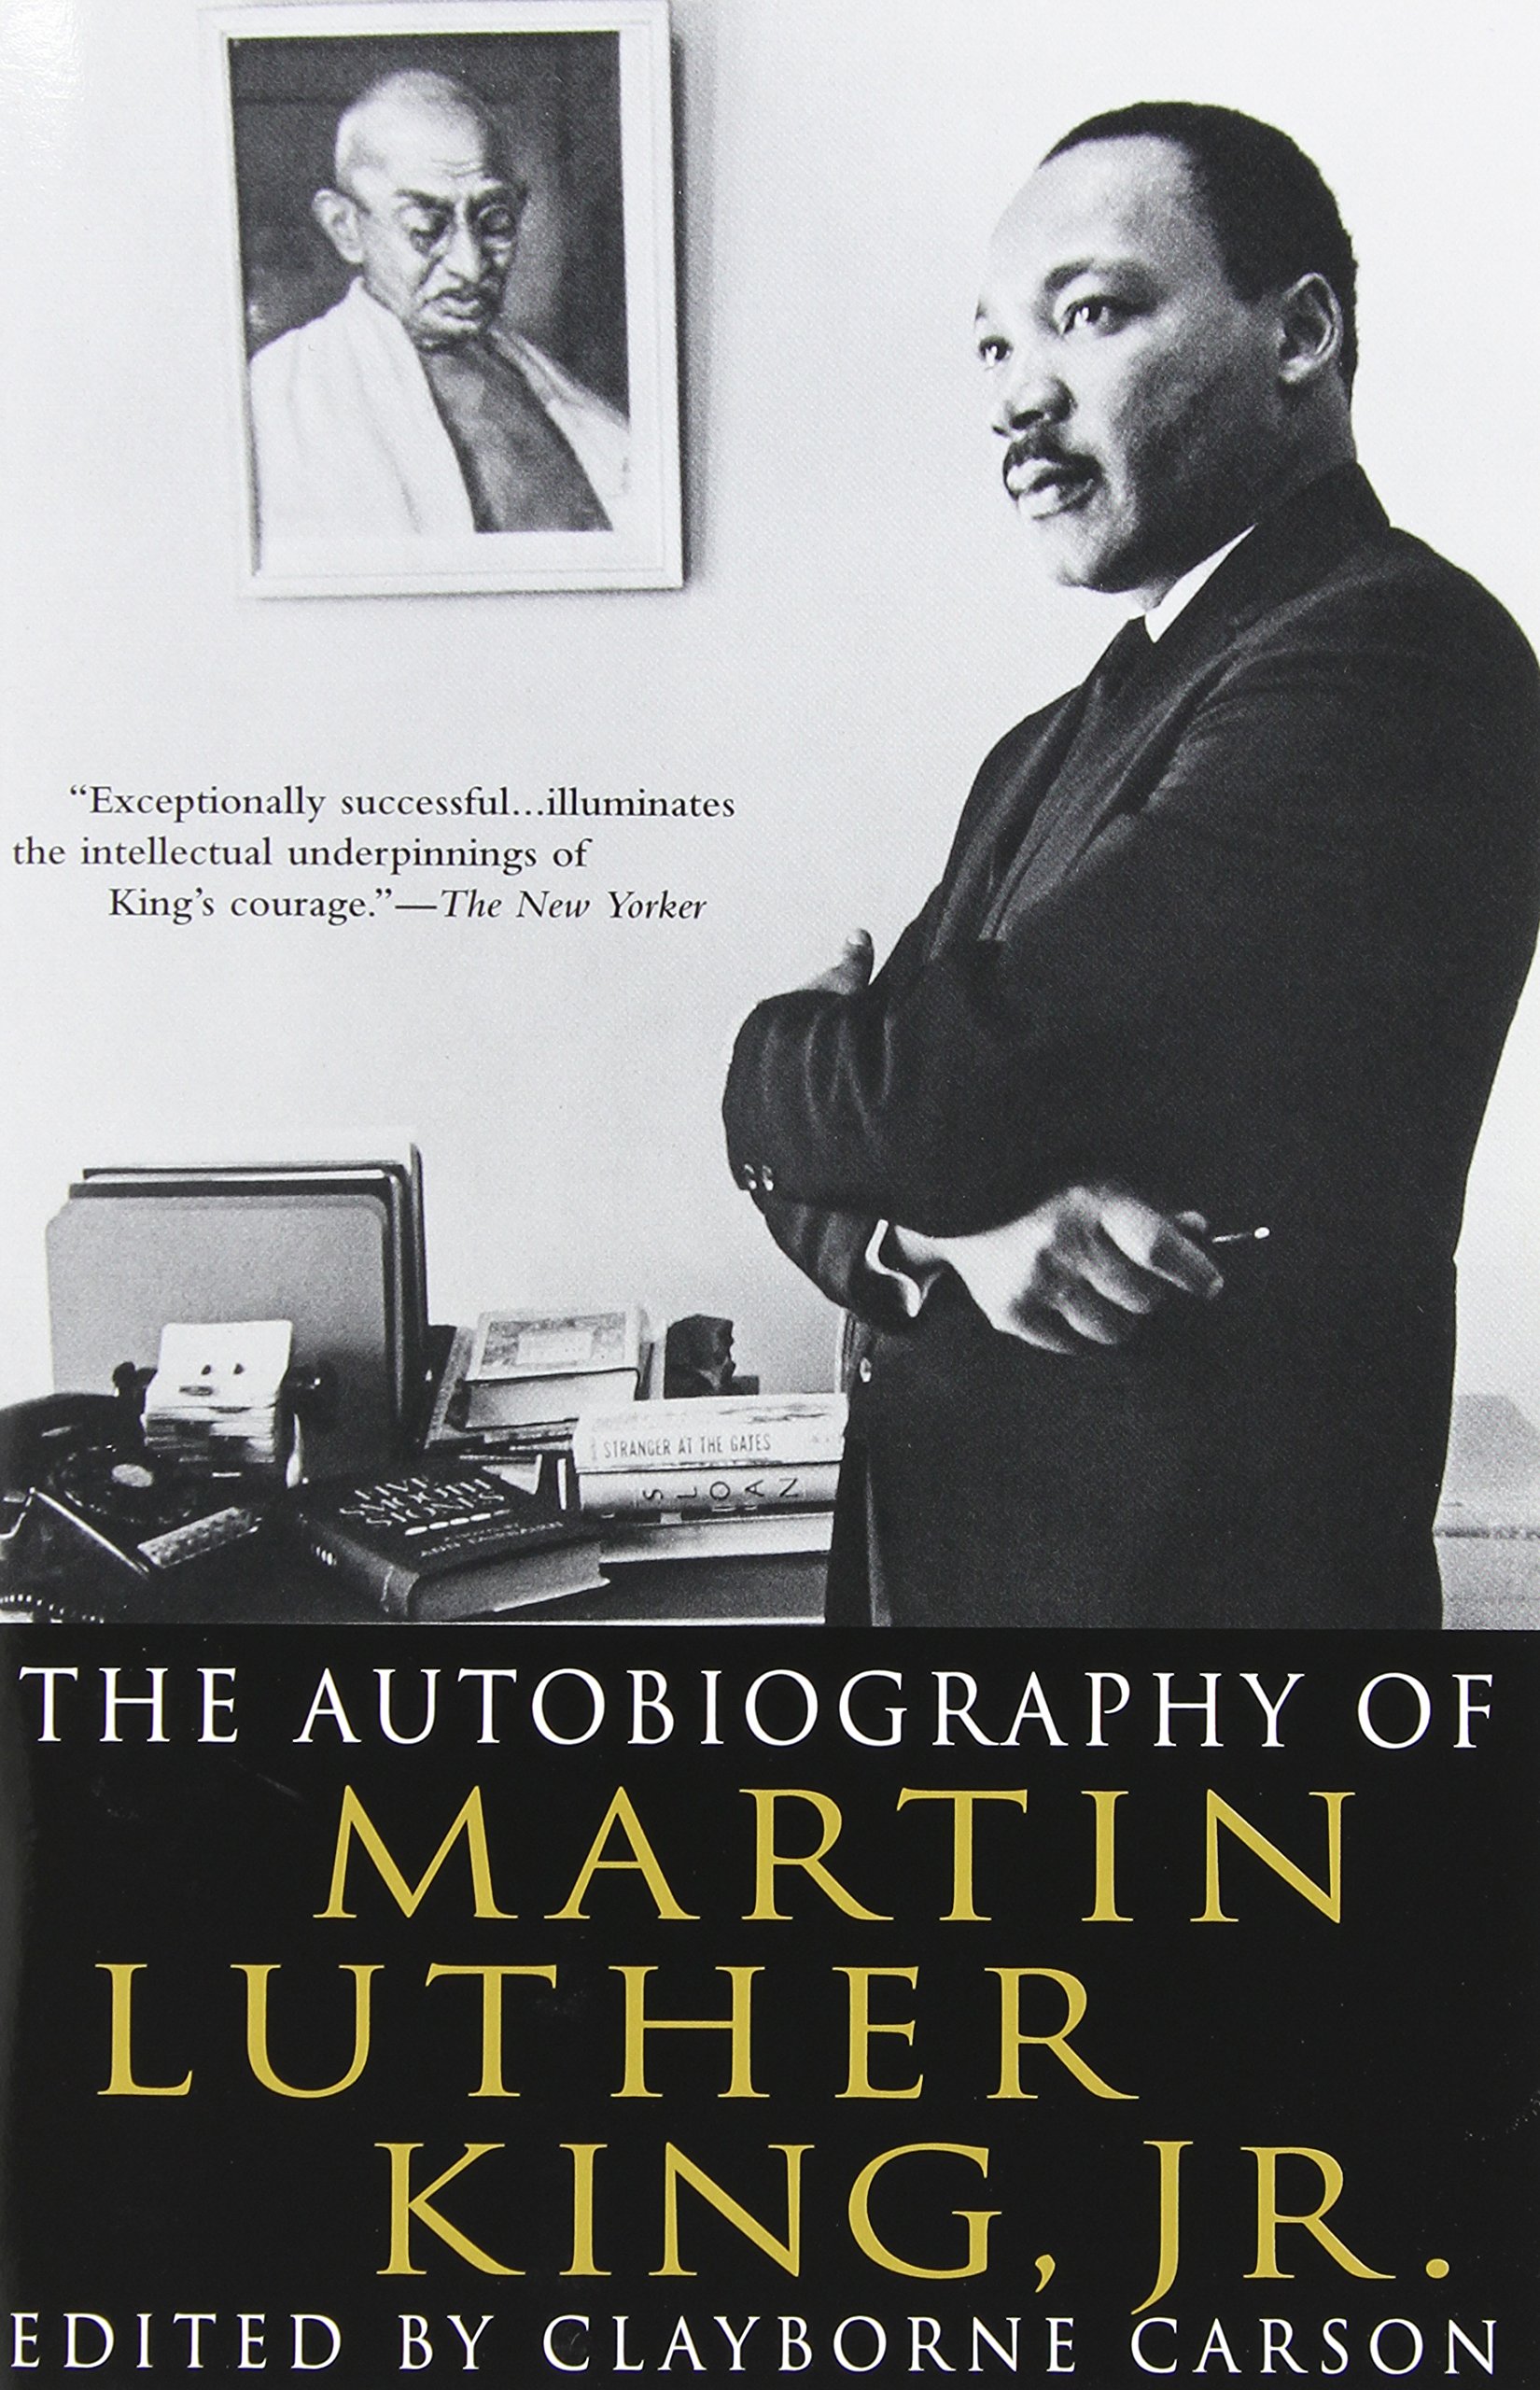 The Autobiography of Martin Luther King, Jr. a book review, of sorts